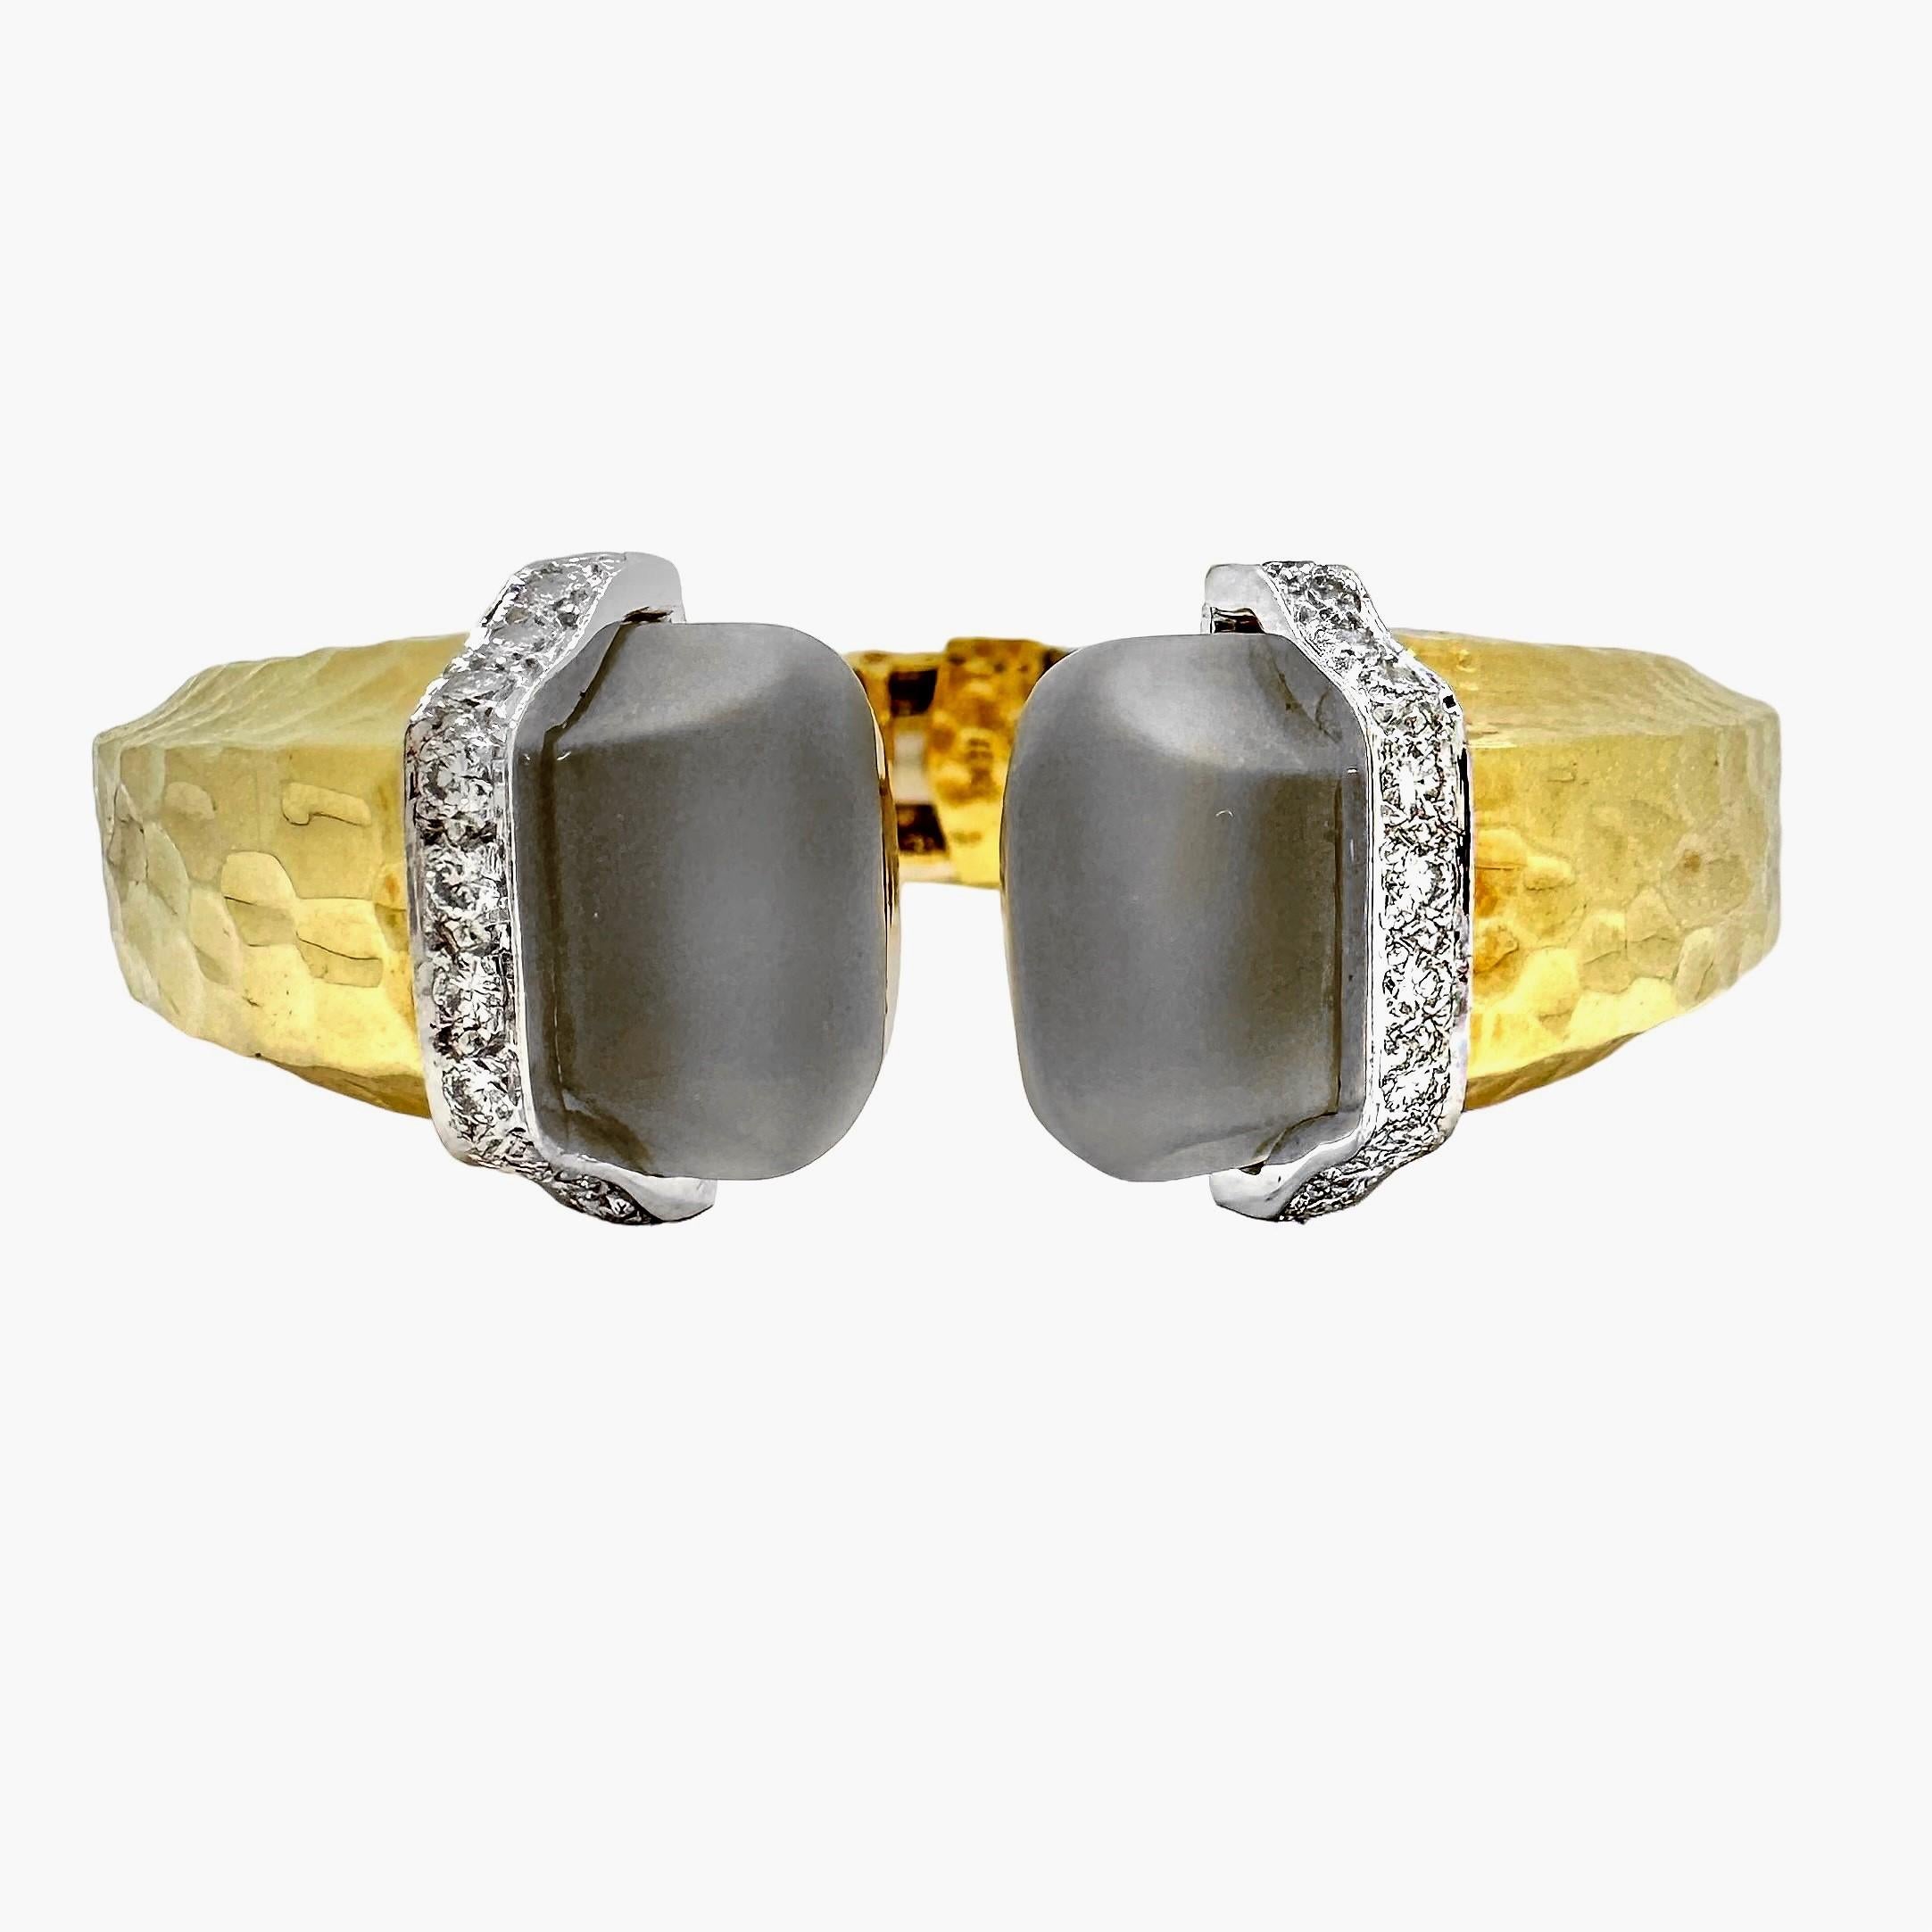 1960s Split Front, Hammered Gold, Diamond & Frosted Crystal Bracelet by R. Stone For Sale 3